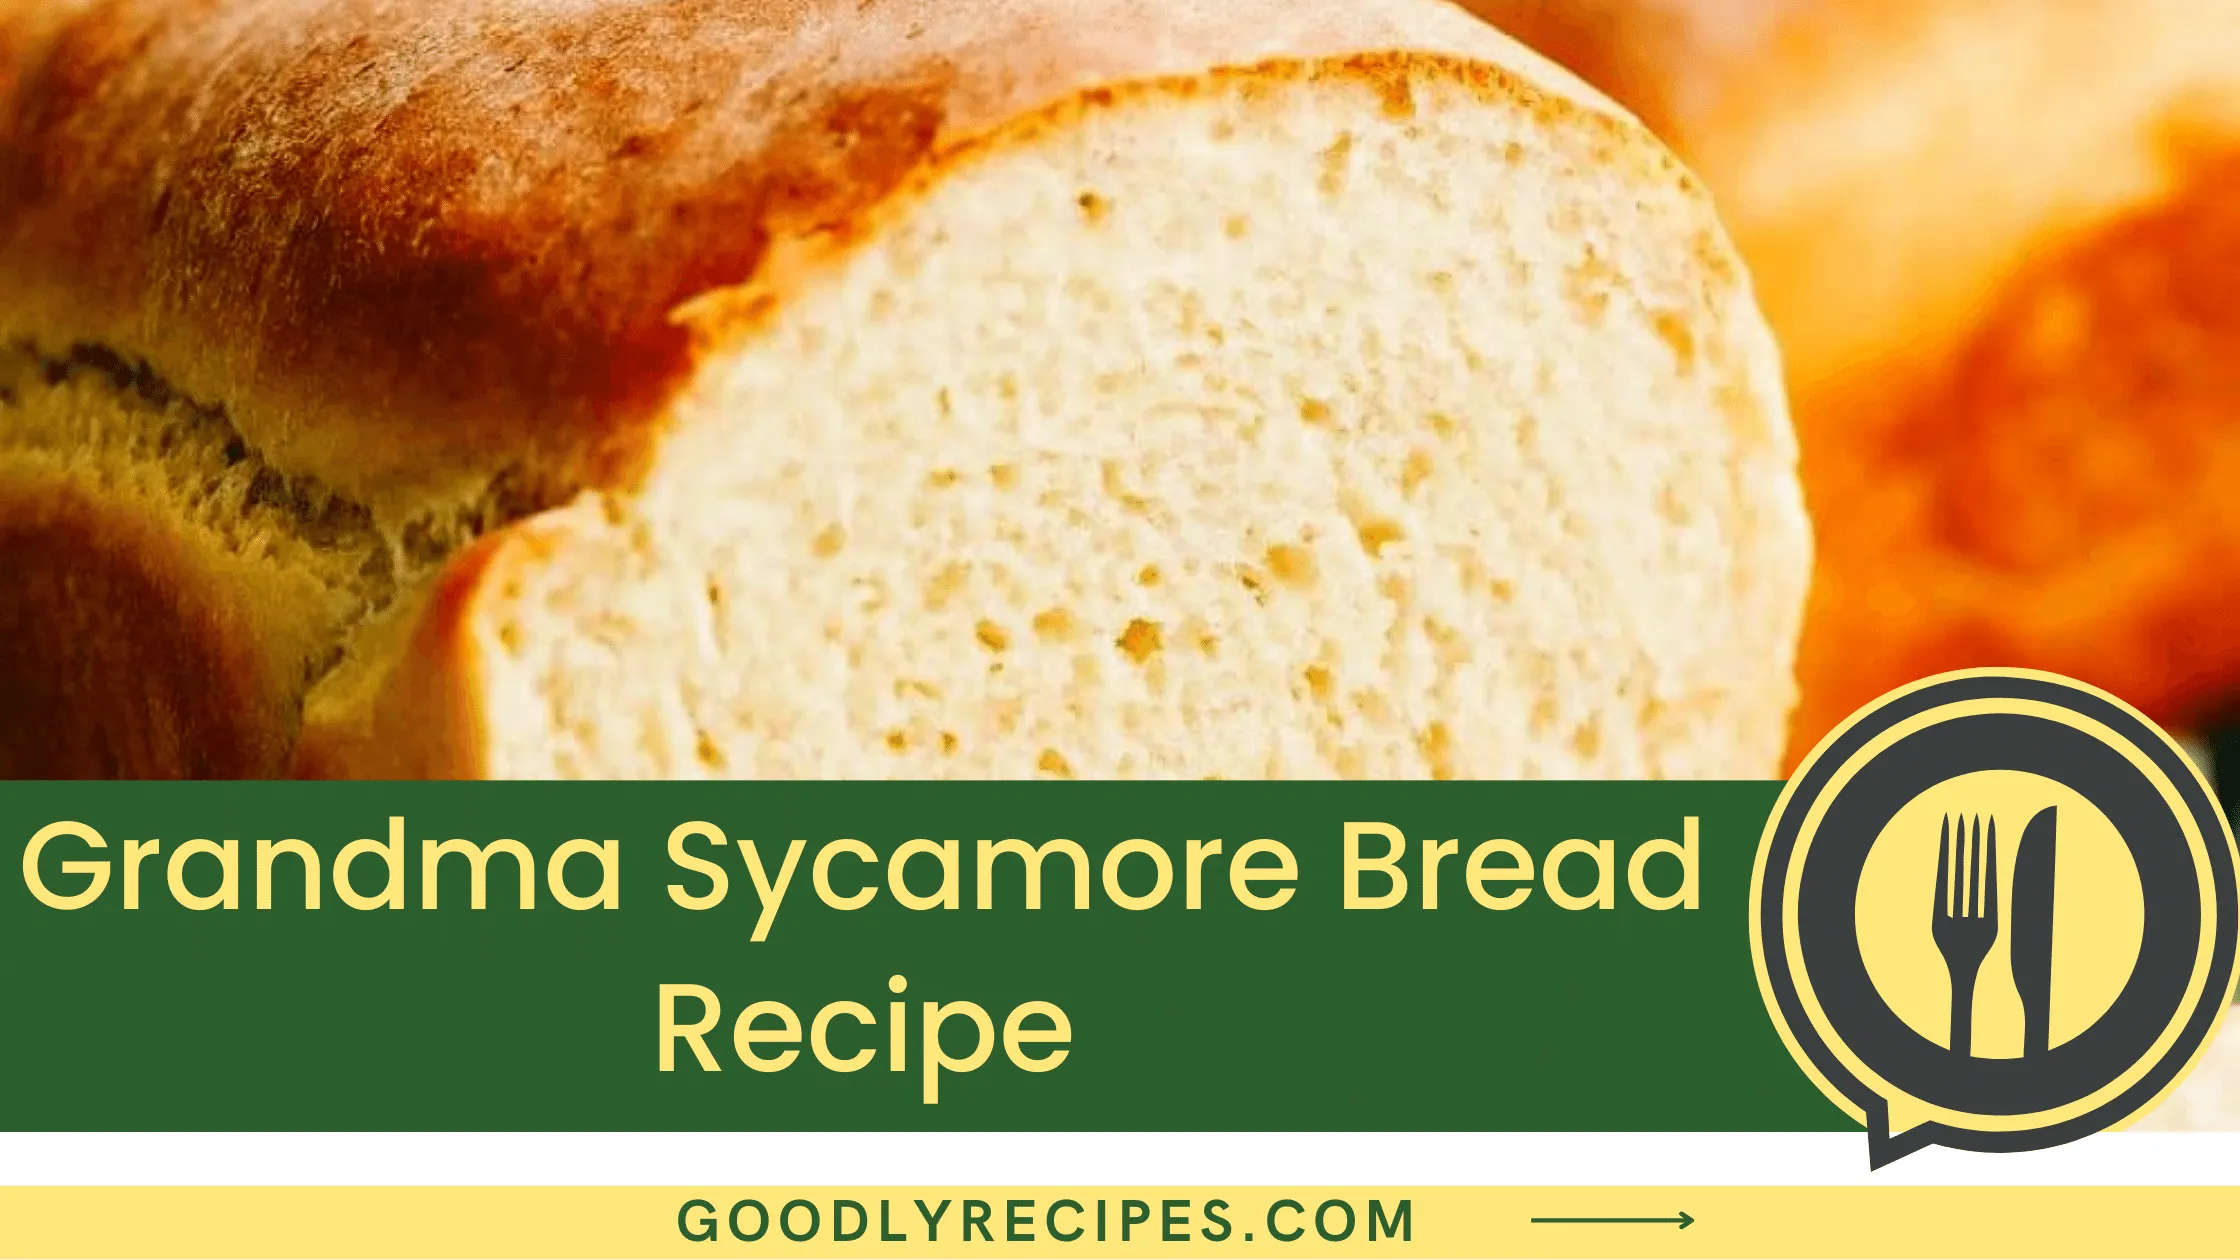 What is Grandma Sycamore Bread?